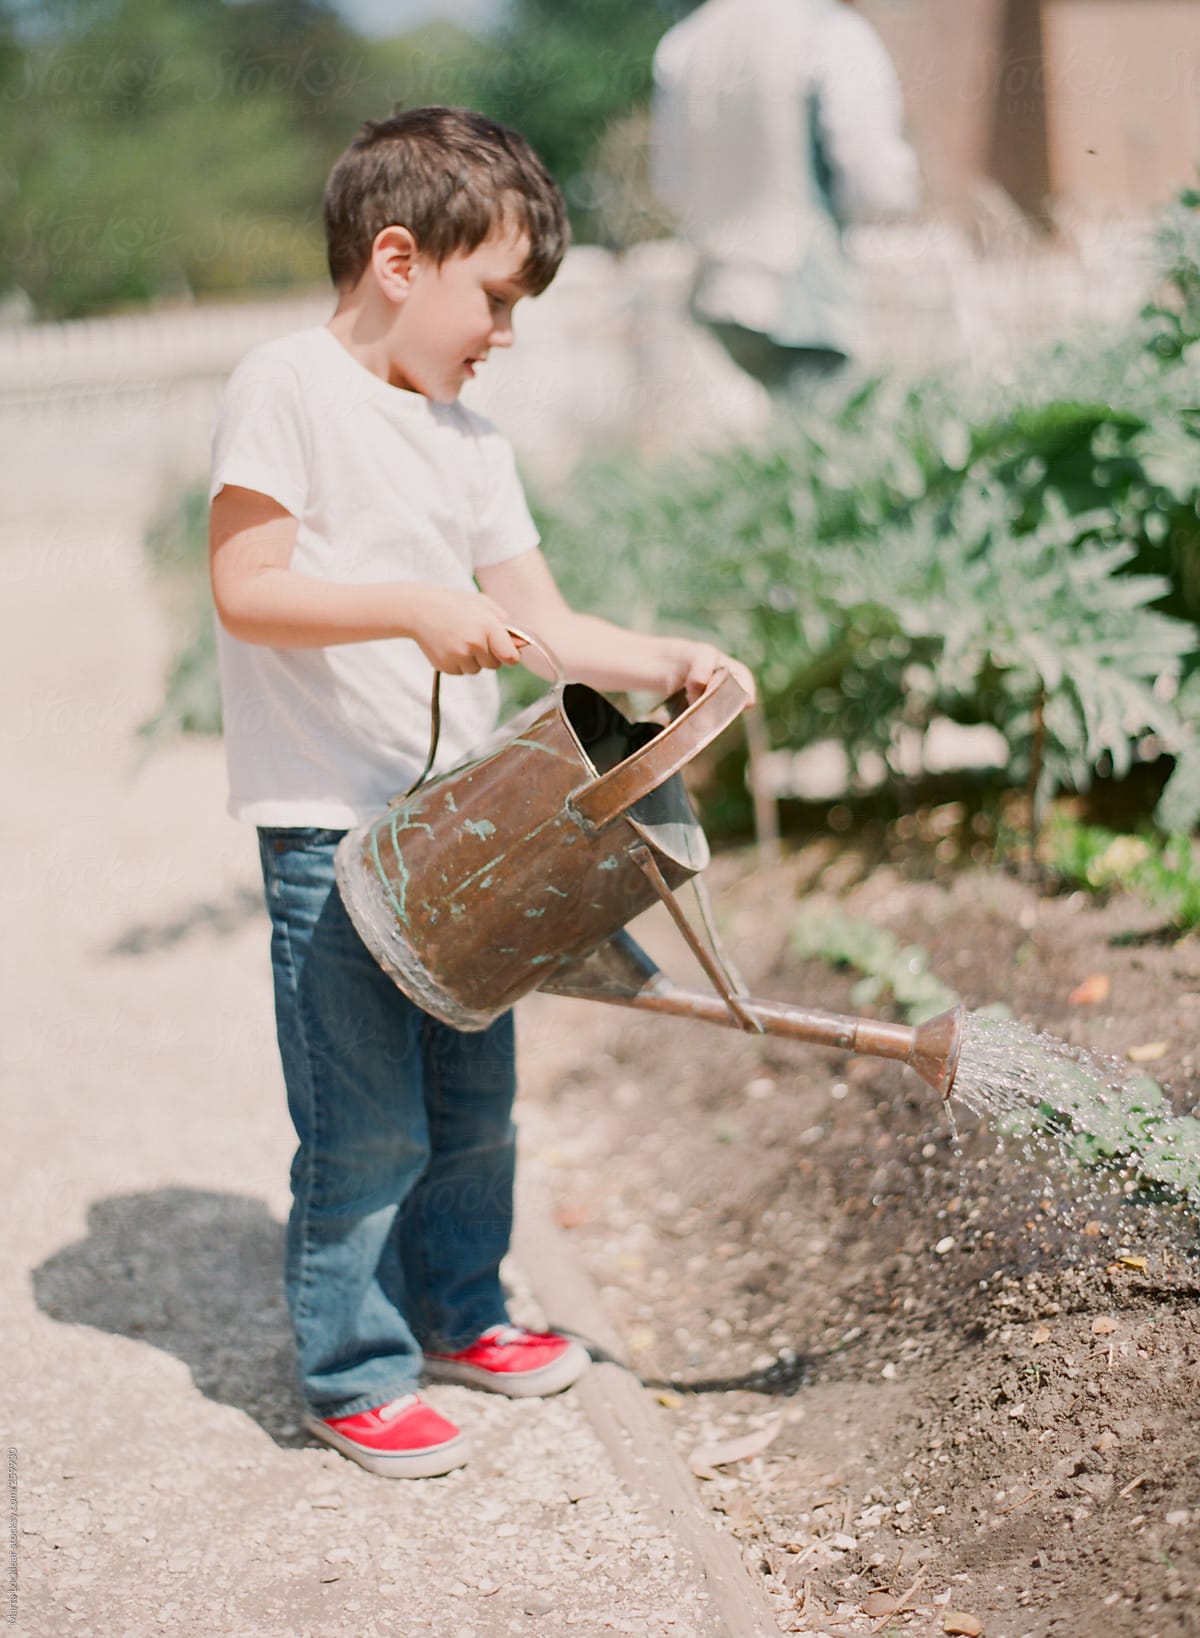 Young boy using an old watering can to water the garden plants